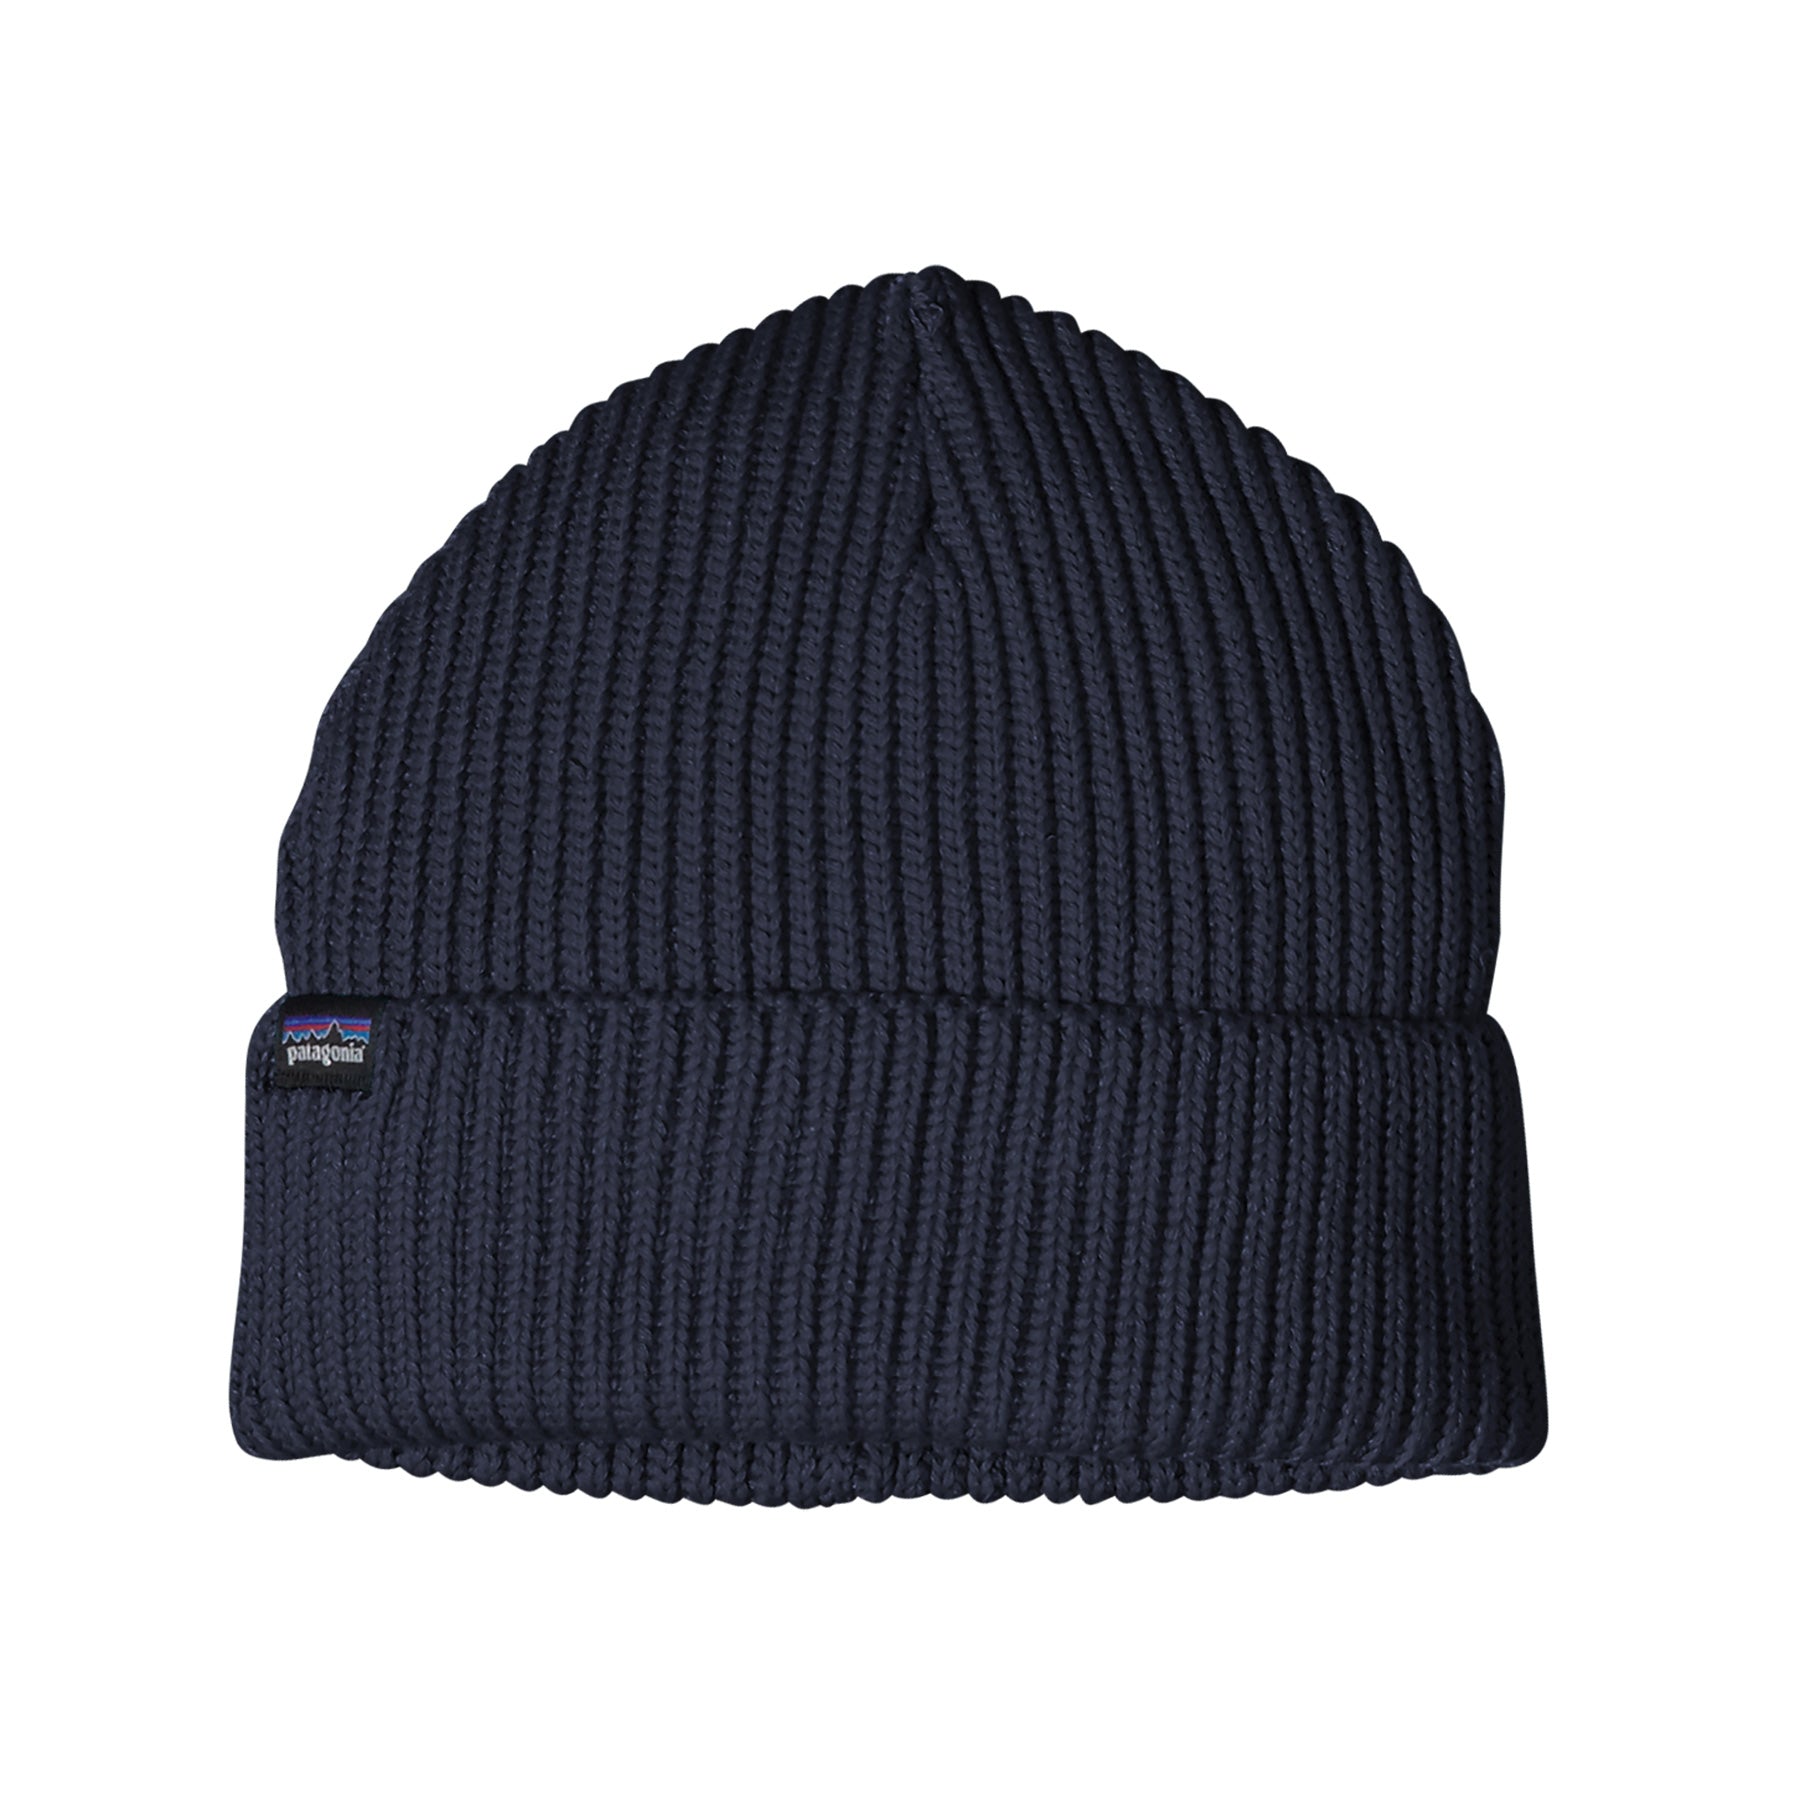 fisherman's rolled beanie in navy blue